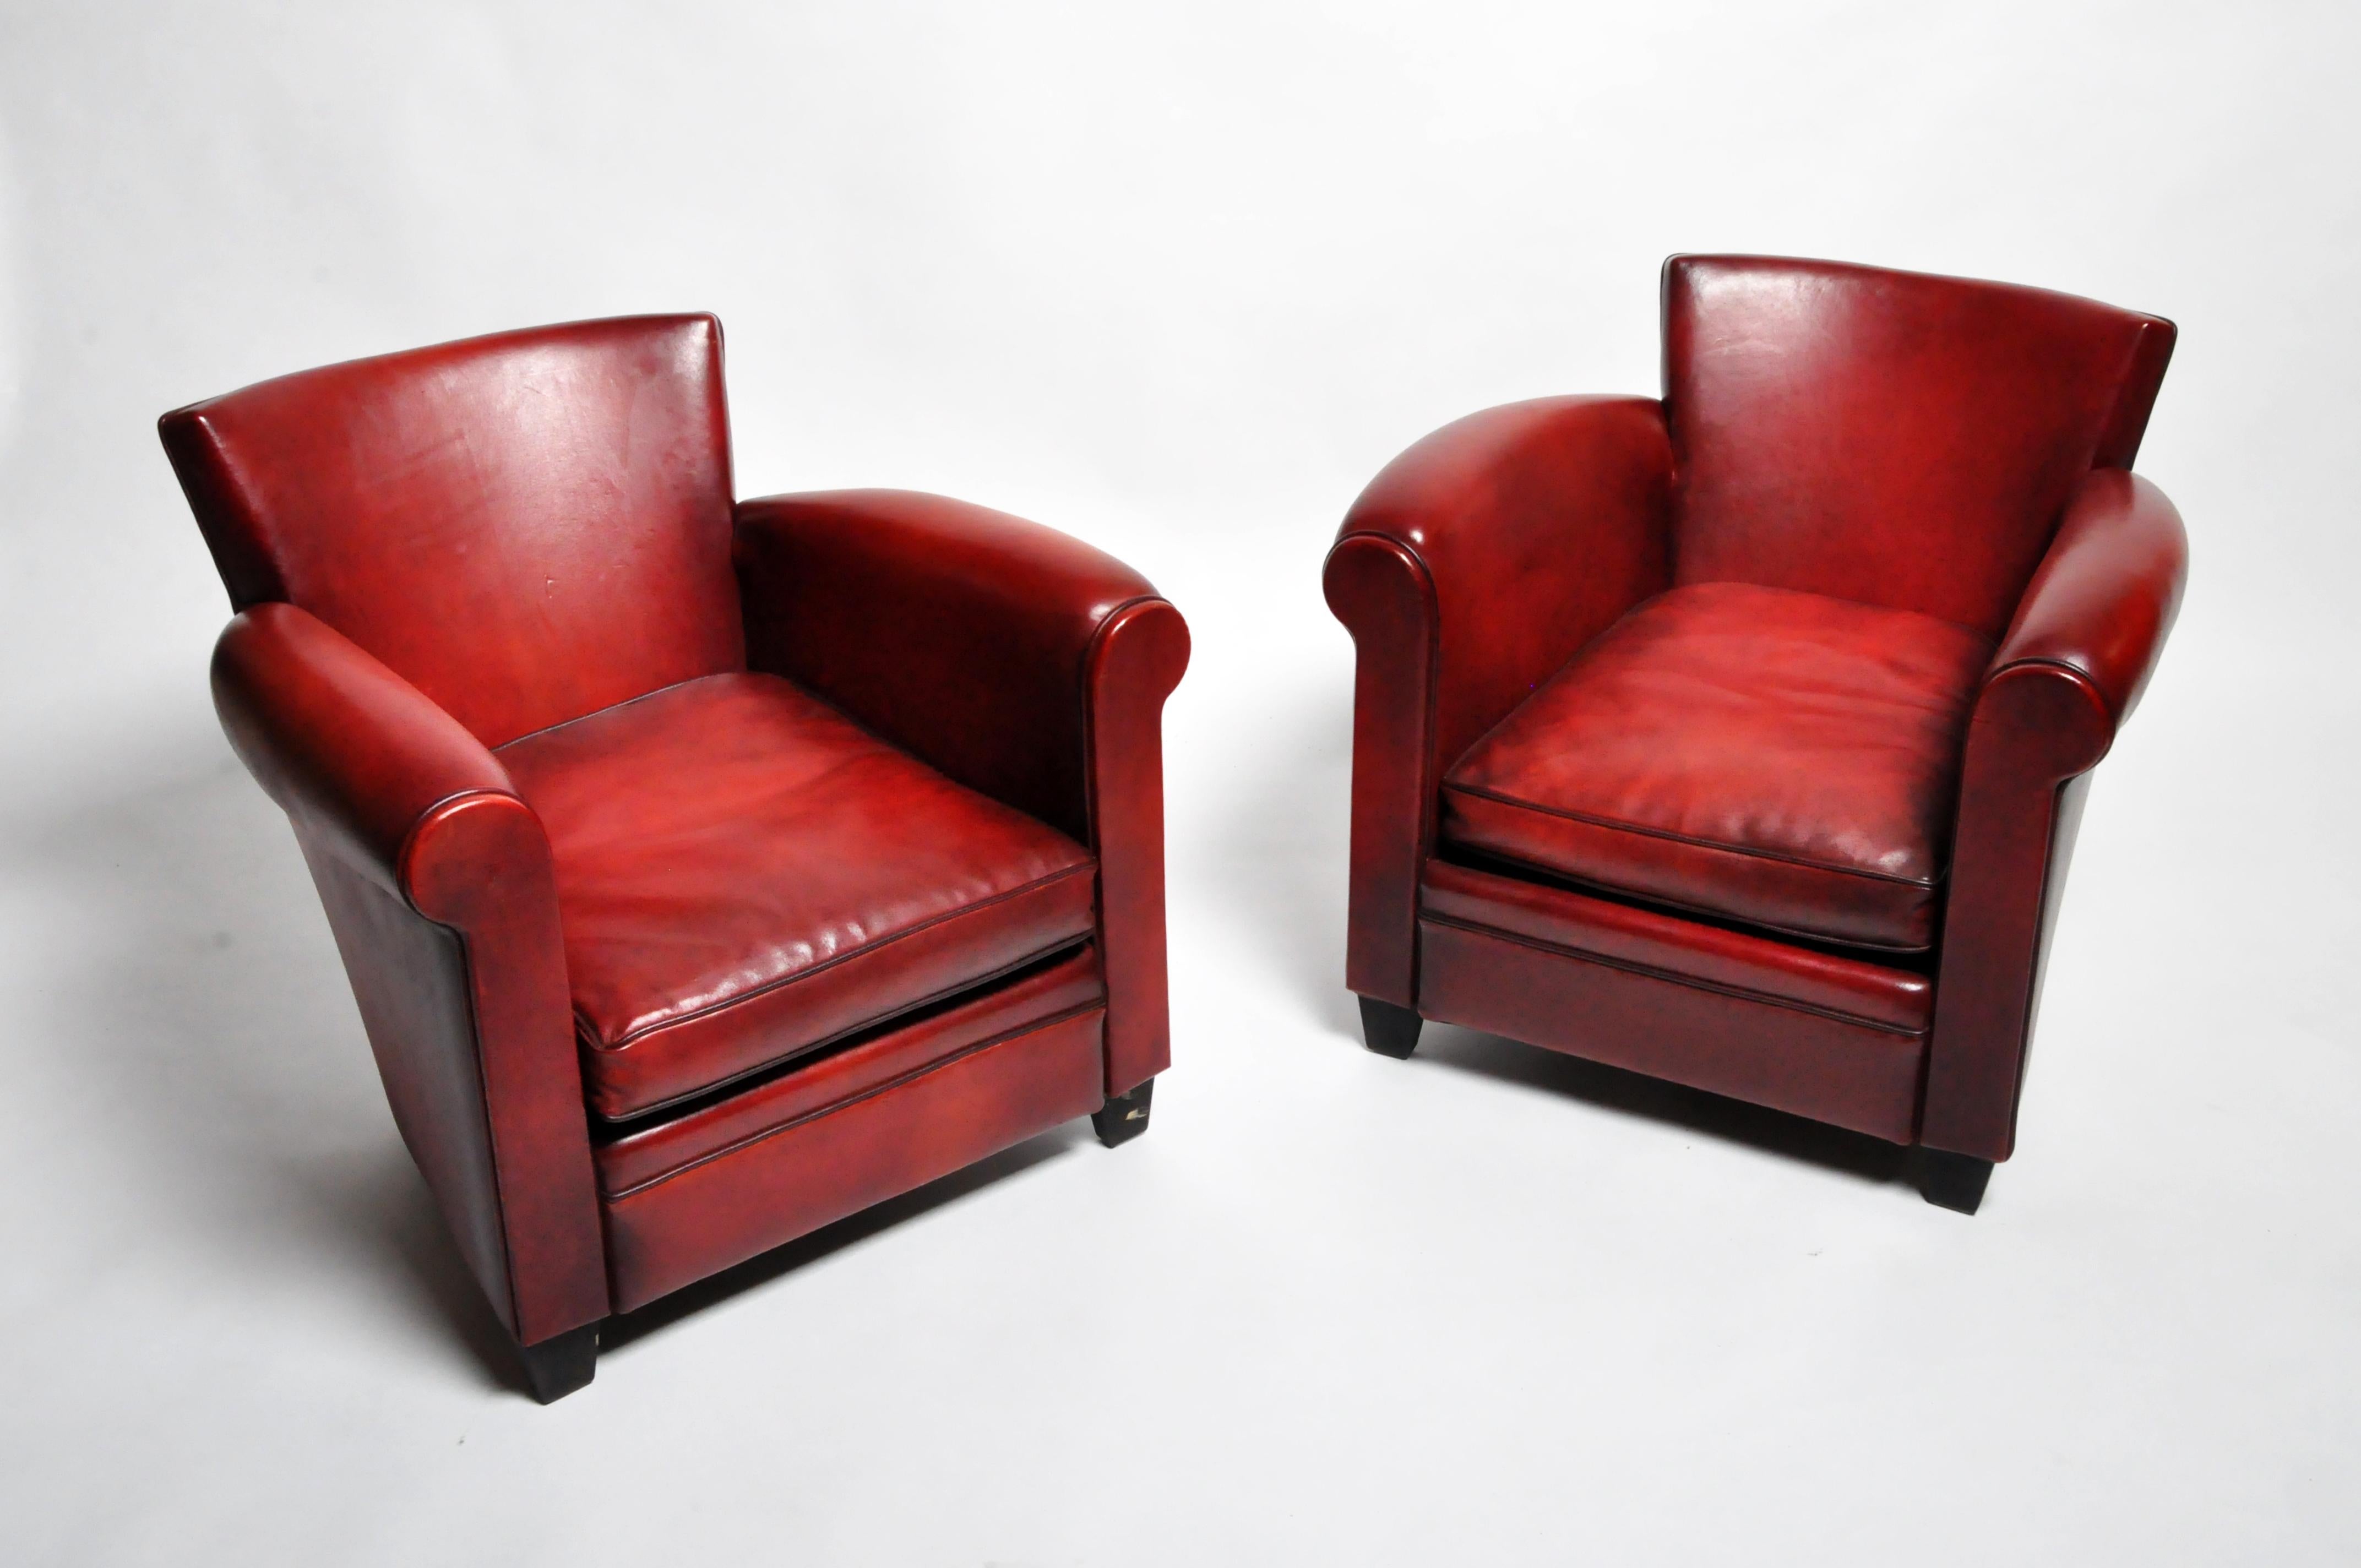 These elegantly-scaled Parisienne club chairs are newly made according to an Art Deco design. The leather is lamb leather which is exceptionally soft and supple. These smaller club chairs are unusually comfortable (due to seat height and ample